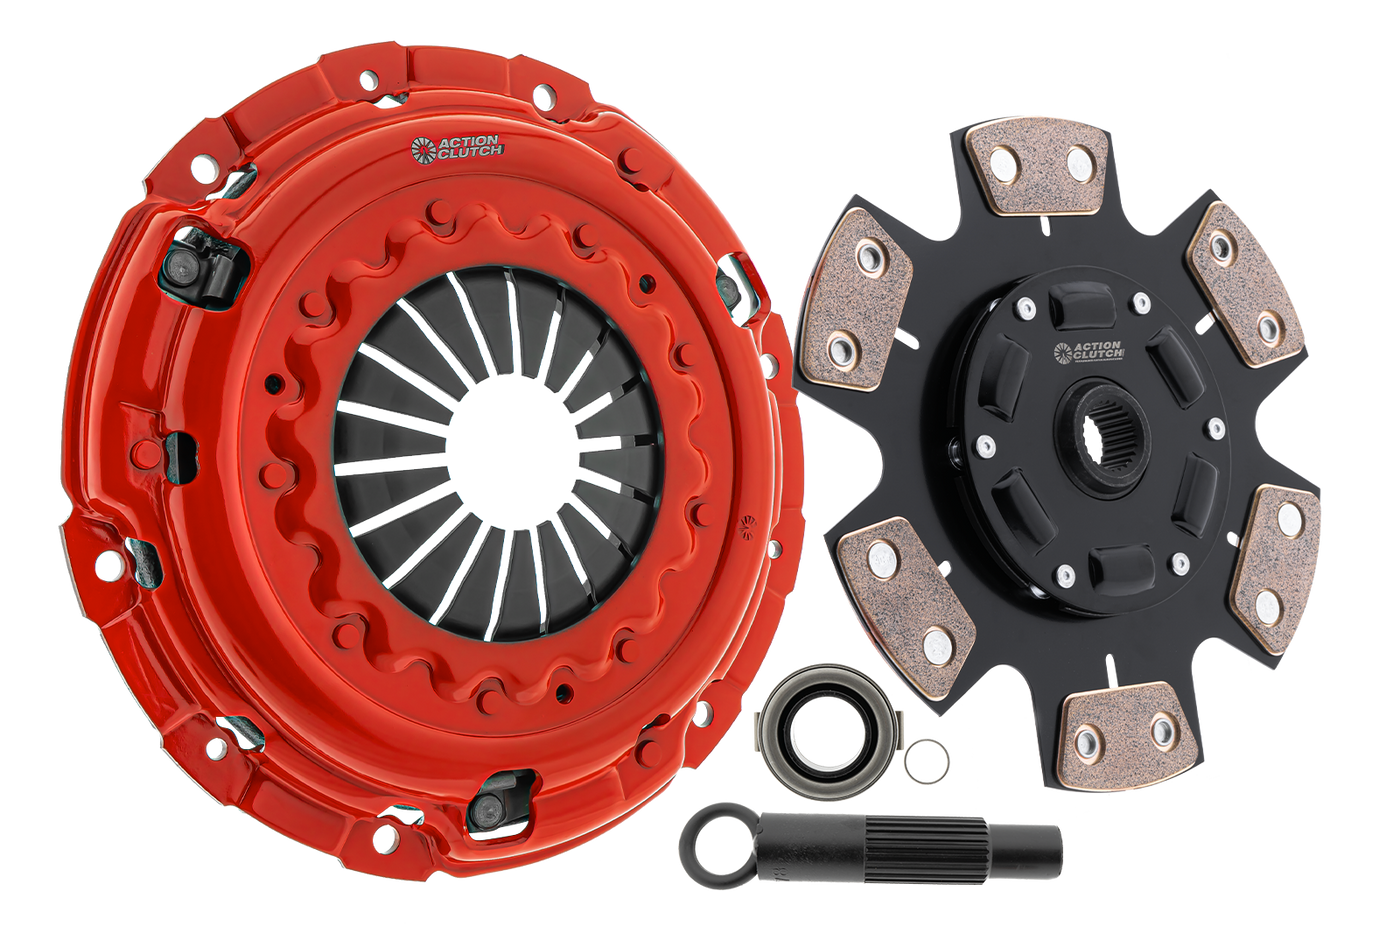 Stage 3 Clutch Kit (1MS) for Nissan 370Z 2009-2020 3.7L (VQ37VHR) Without Heavy Duty Concentric Slave Cylinder